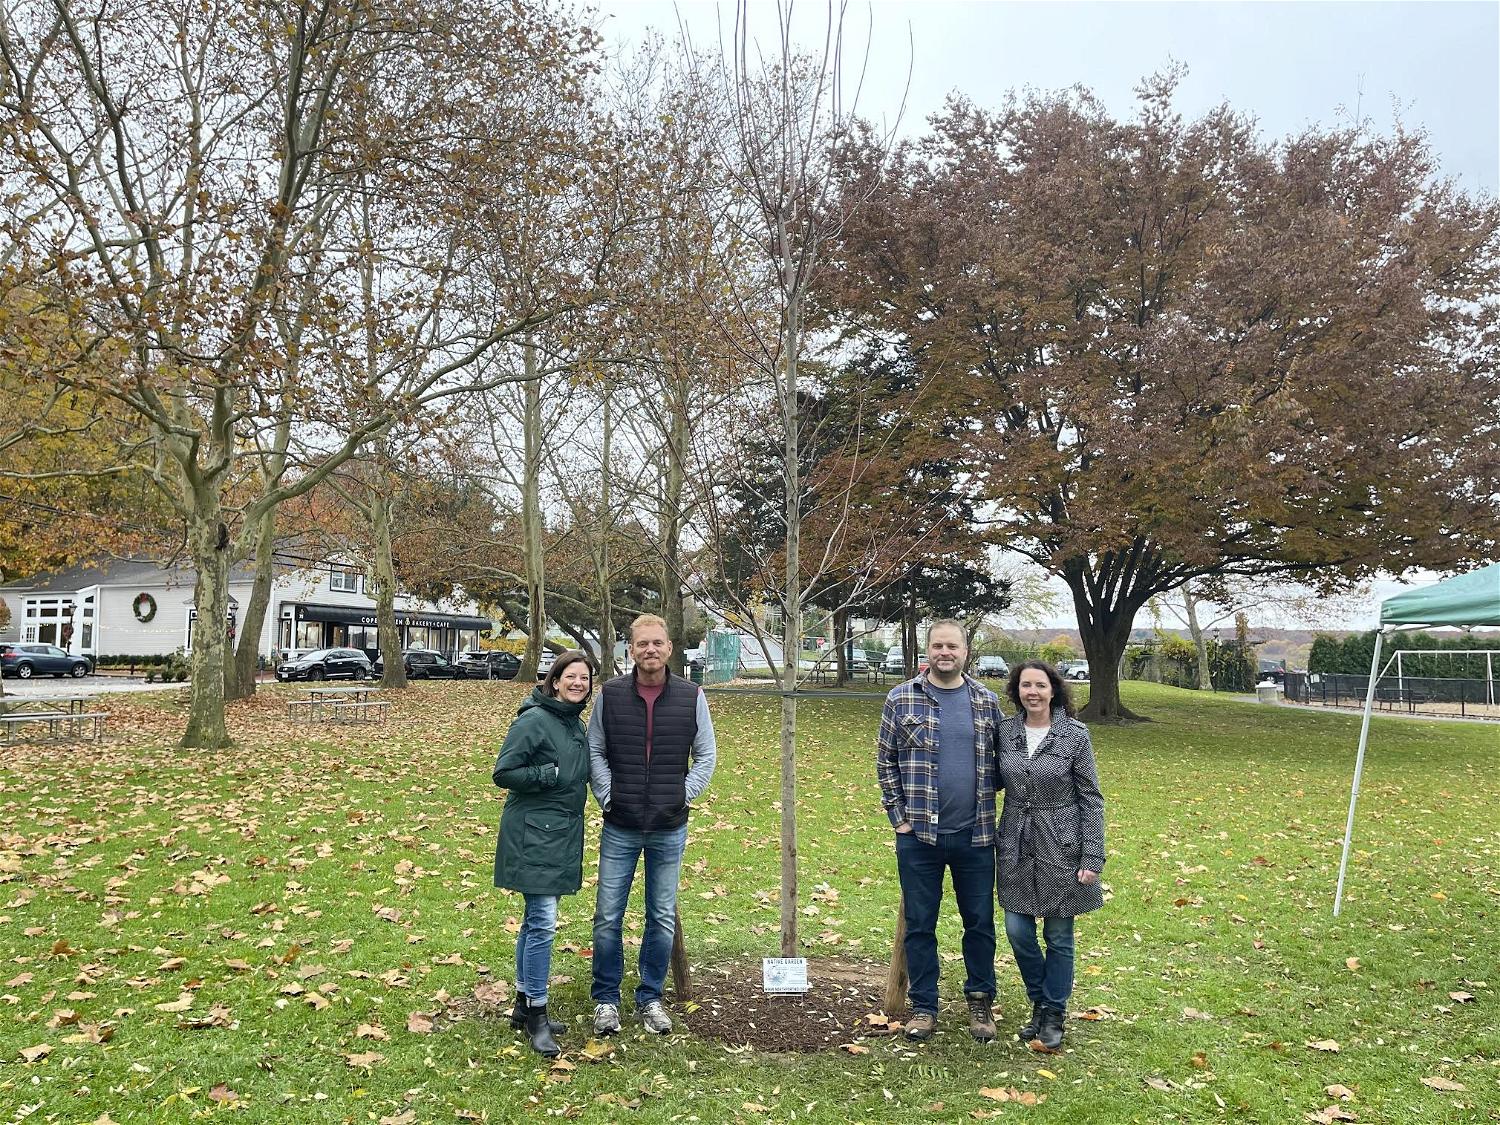 One of two donated native red maple trees in Cow Harbor Park. The 14-inch caliper trees are 18 feet in height and contribute to the park’s biodiversity. From left, Nicole Tamaro, Robb Smith, Matt Gorman and Barbara Bolen. 